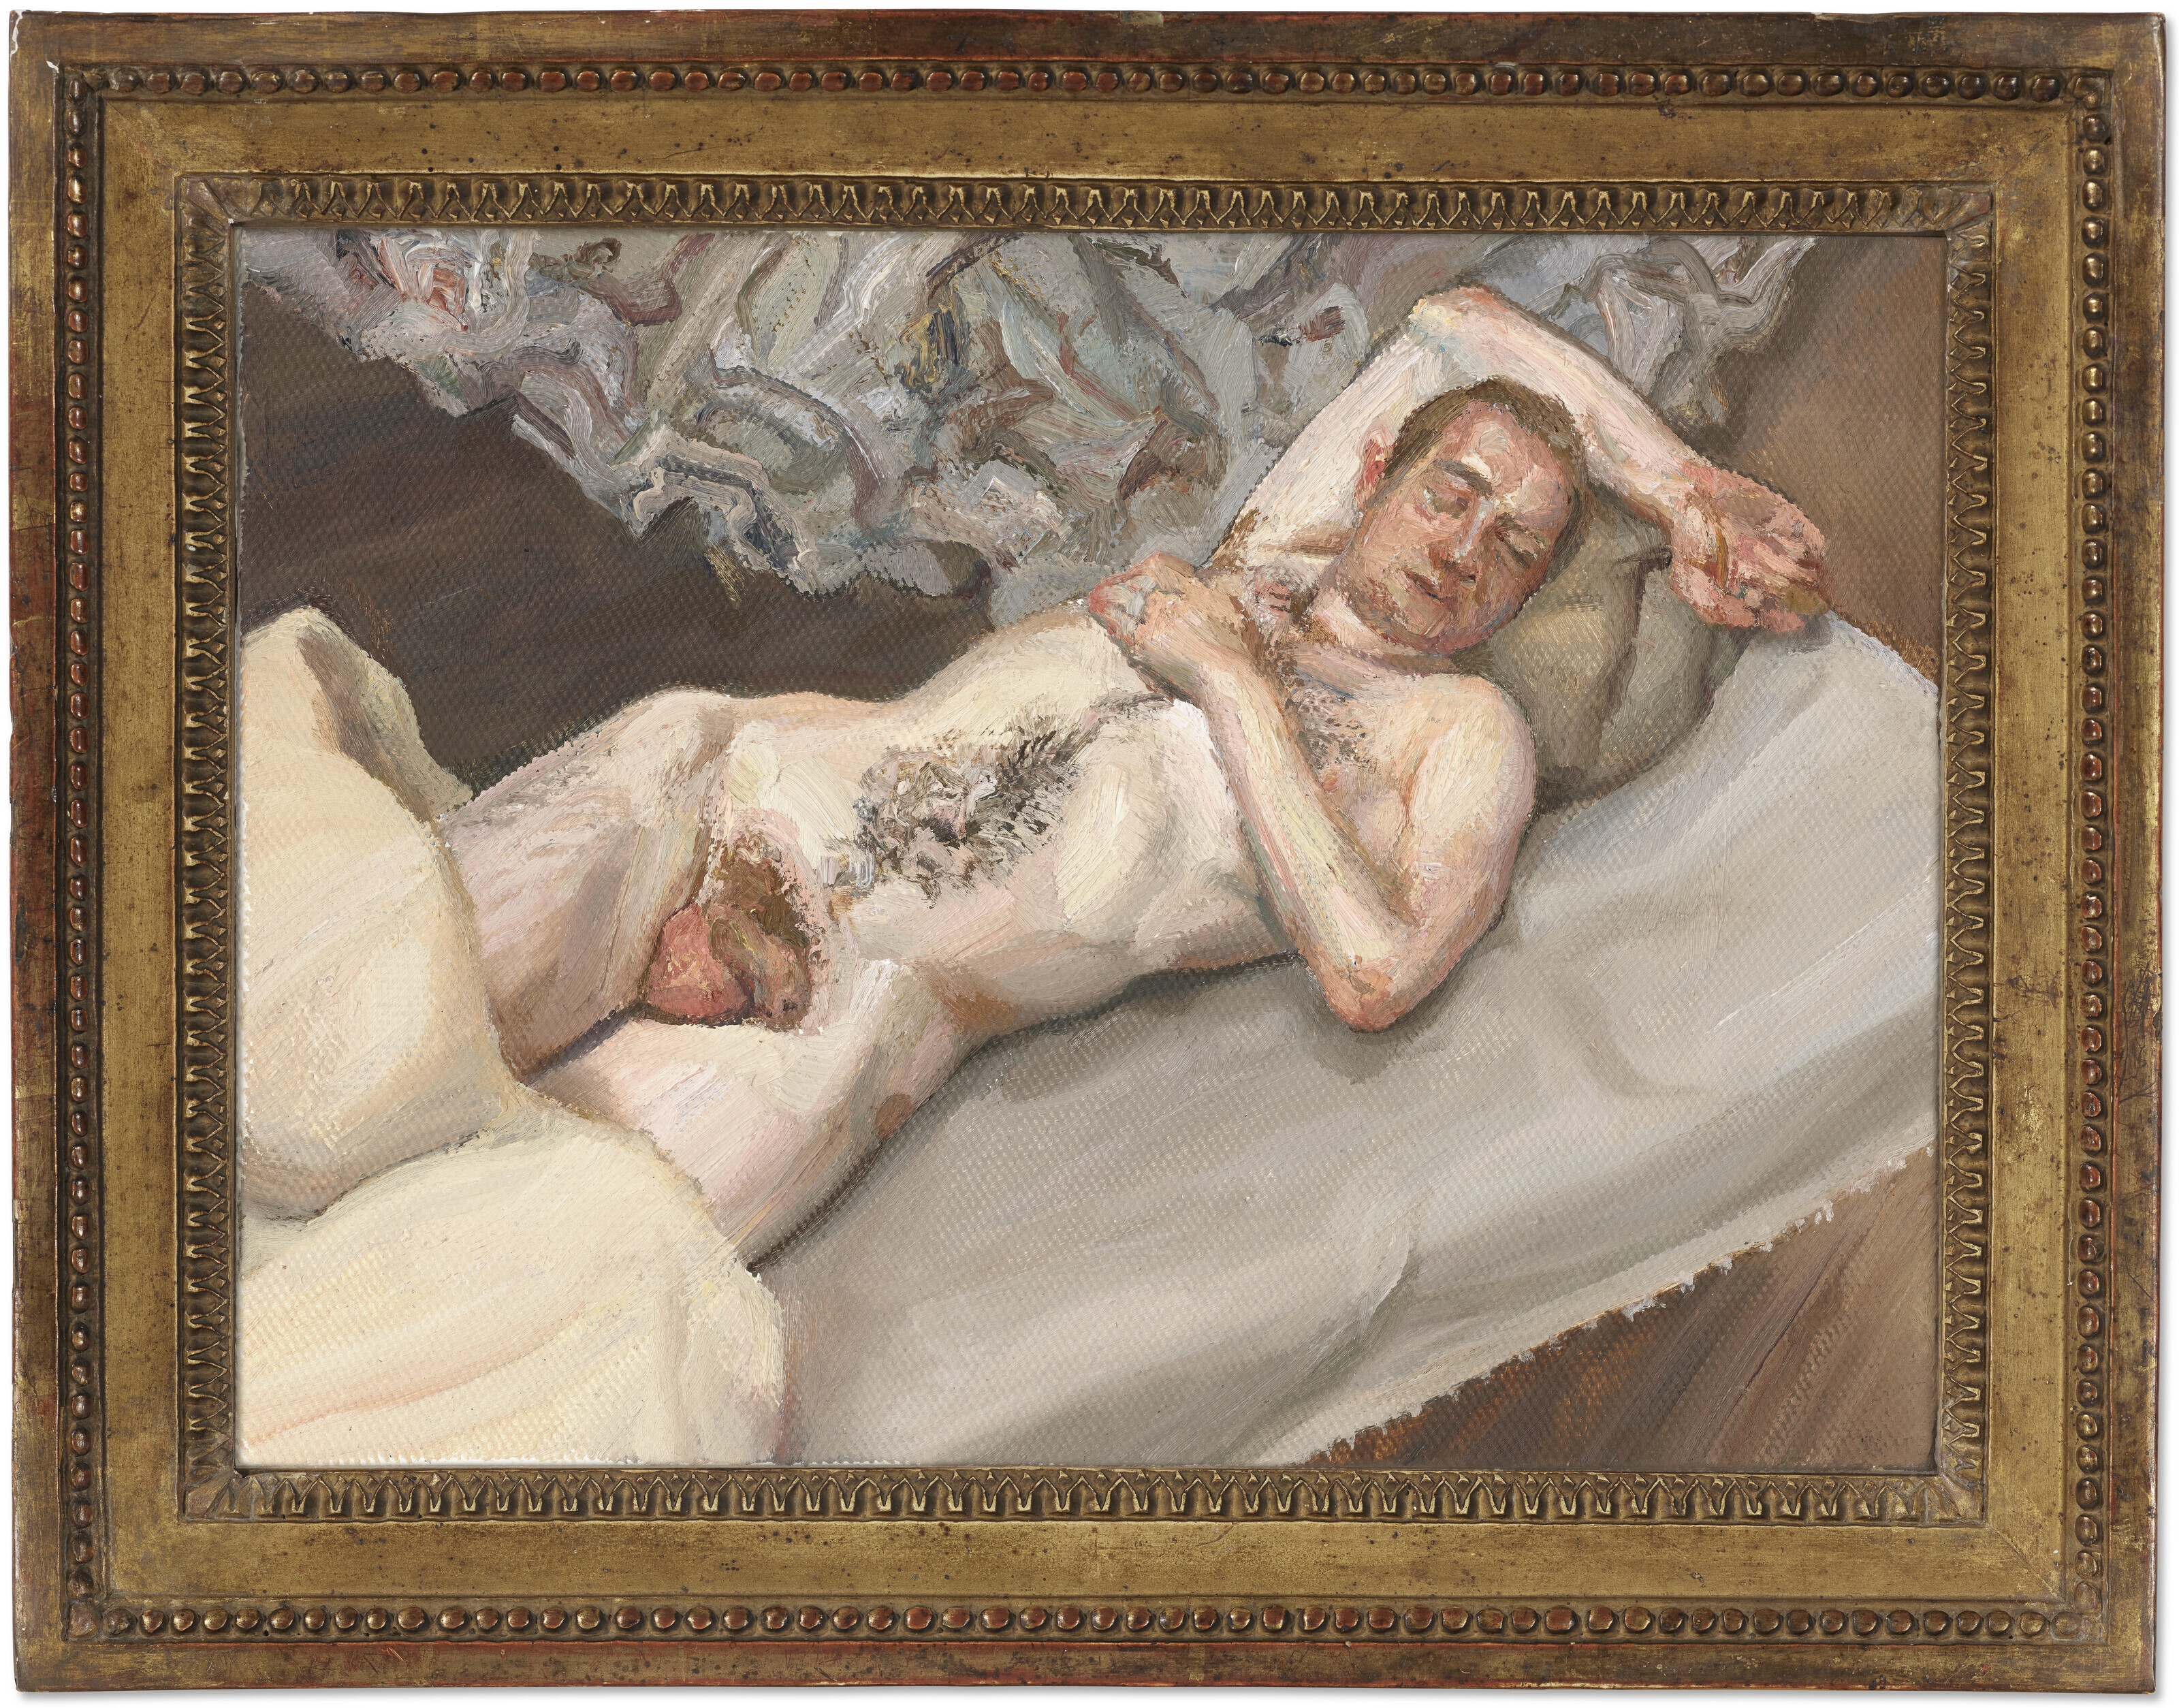 Man Resting by Lucian Freud, Painted in 1988